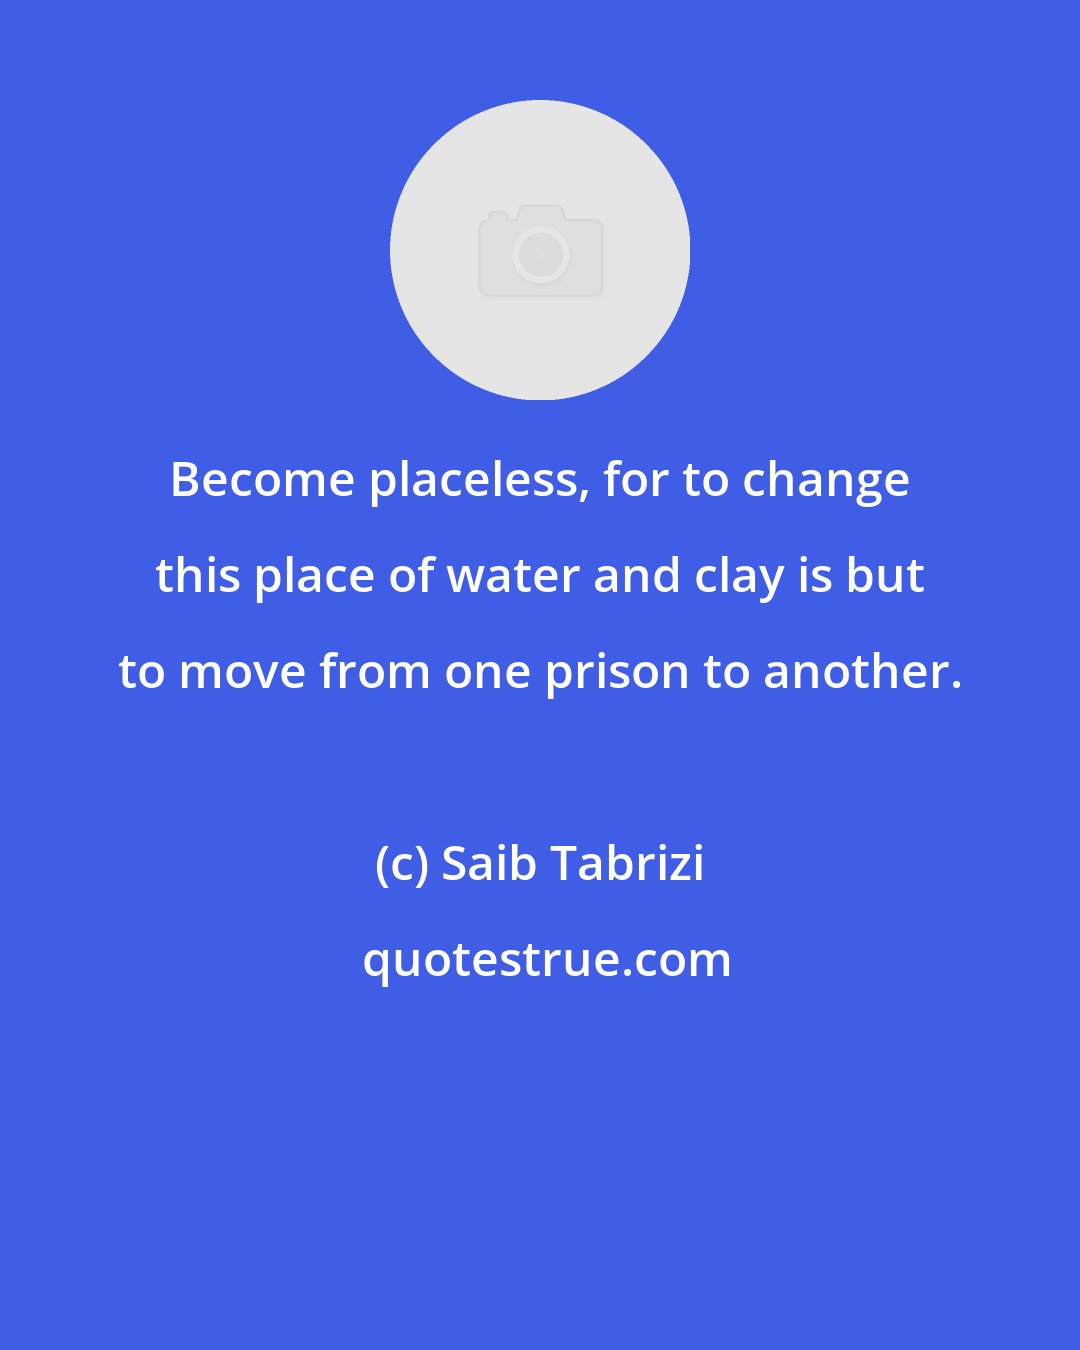 Saib Tabrizi: Become placeless, for to change this place of water and clay is but to move from one prison to another.